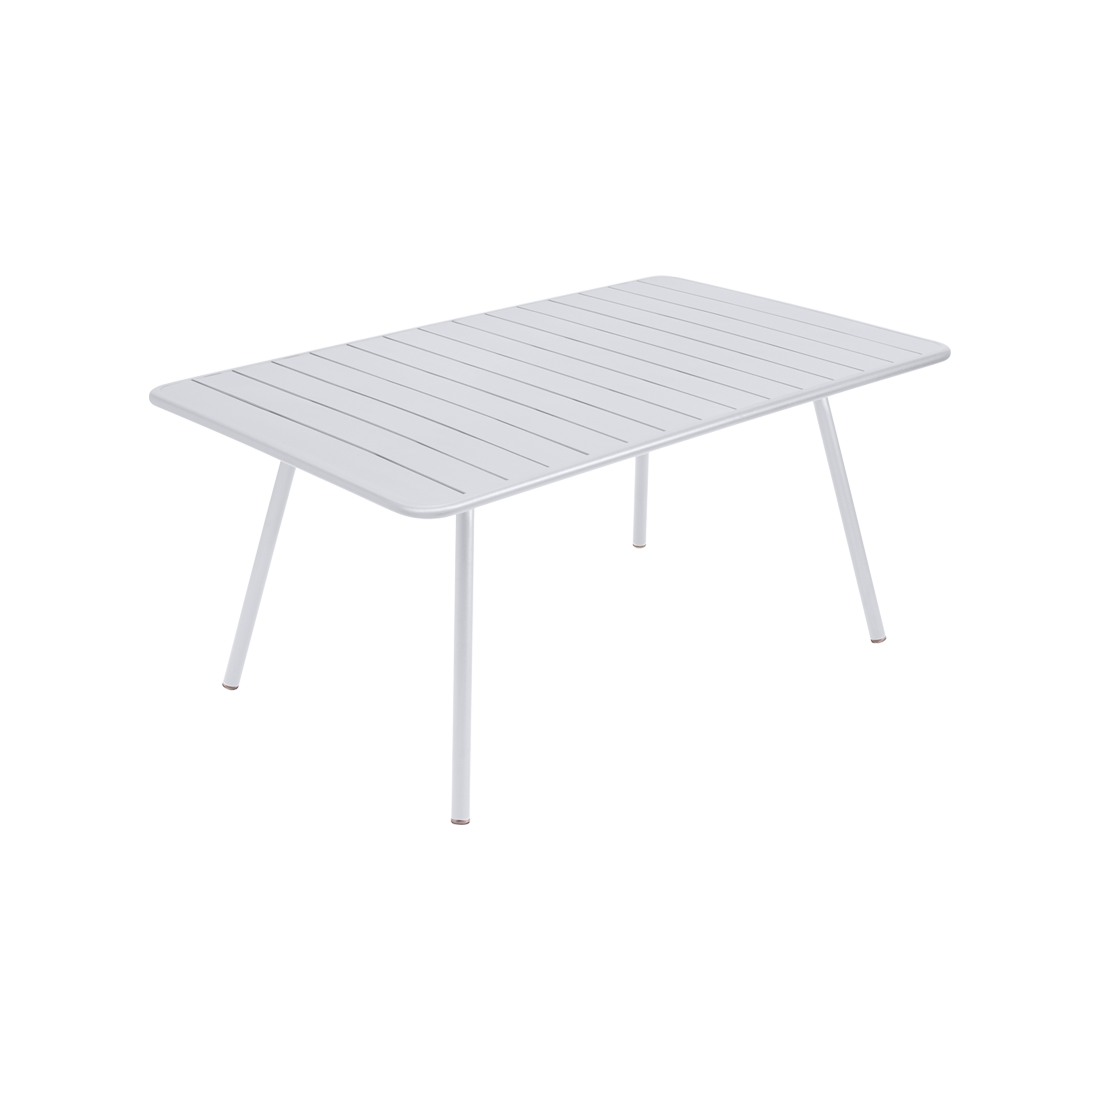 FERMOB Luxembourg 6-8 Seater Outdoor Dining Table